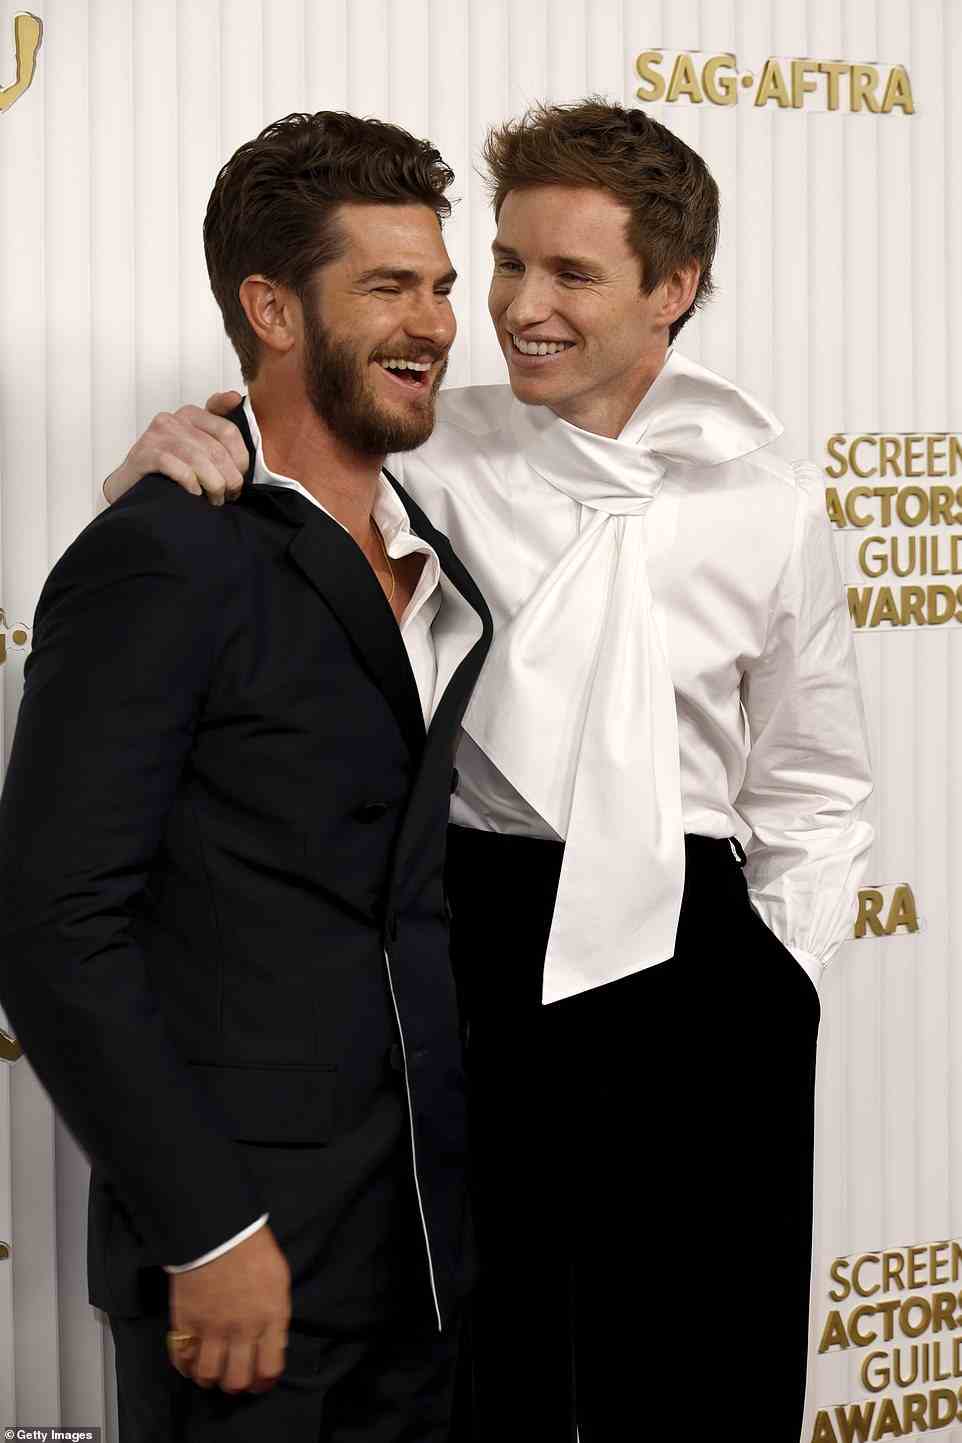 Pals! Andrew Garfield and Eddie Redmayne shared a laugh on the red carpet together